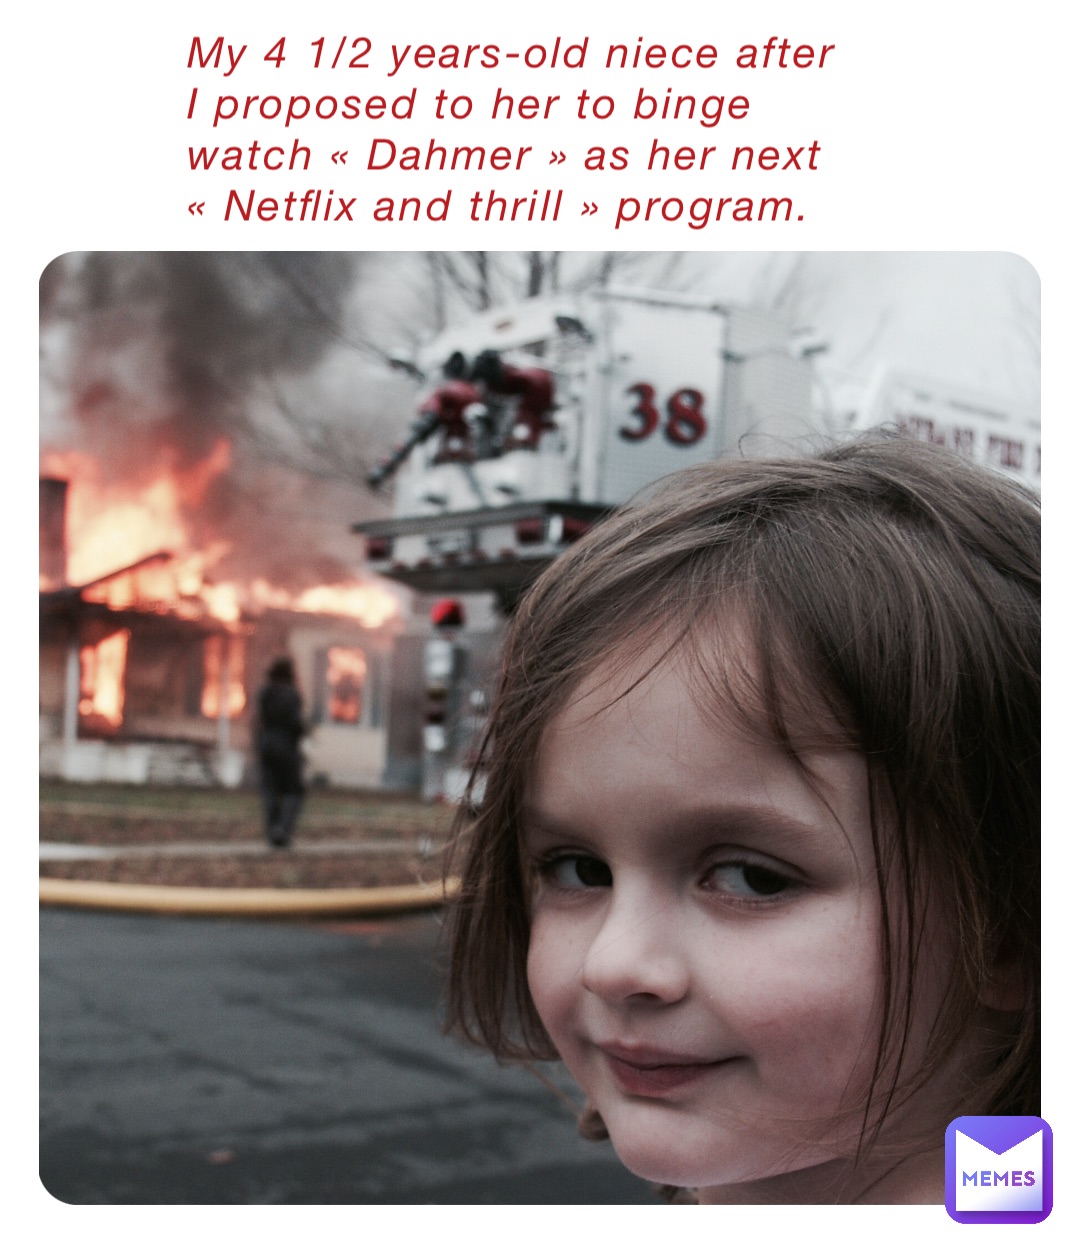 My 4 1/2 years-old niece after I proposed to her to binge watch « Dahmer » as her next « Netflix and thrill » program.